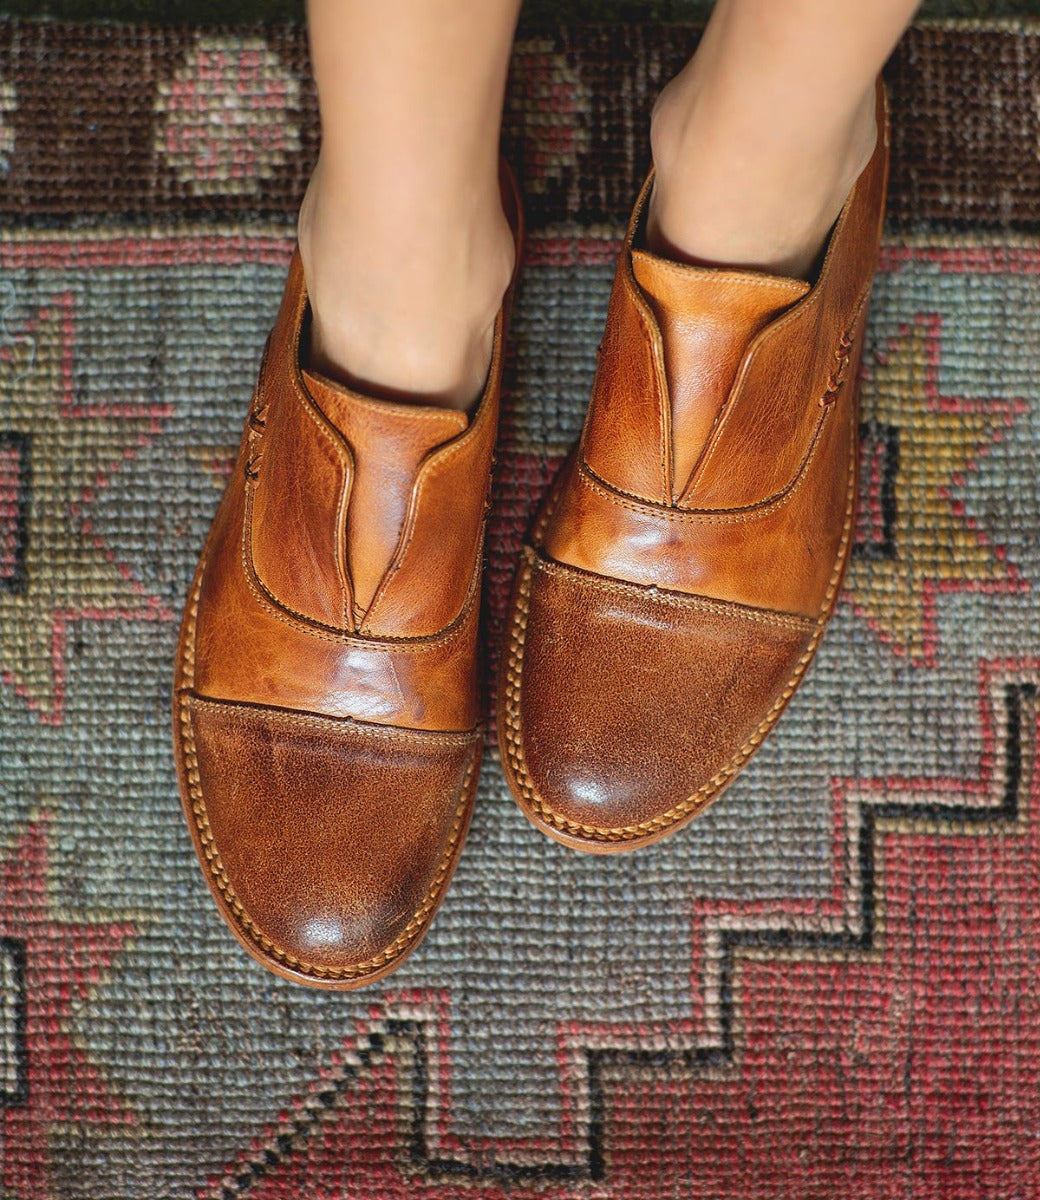 A pair of Bed Stu Rose brown leather shoes standing on a rug.